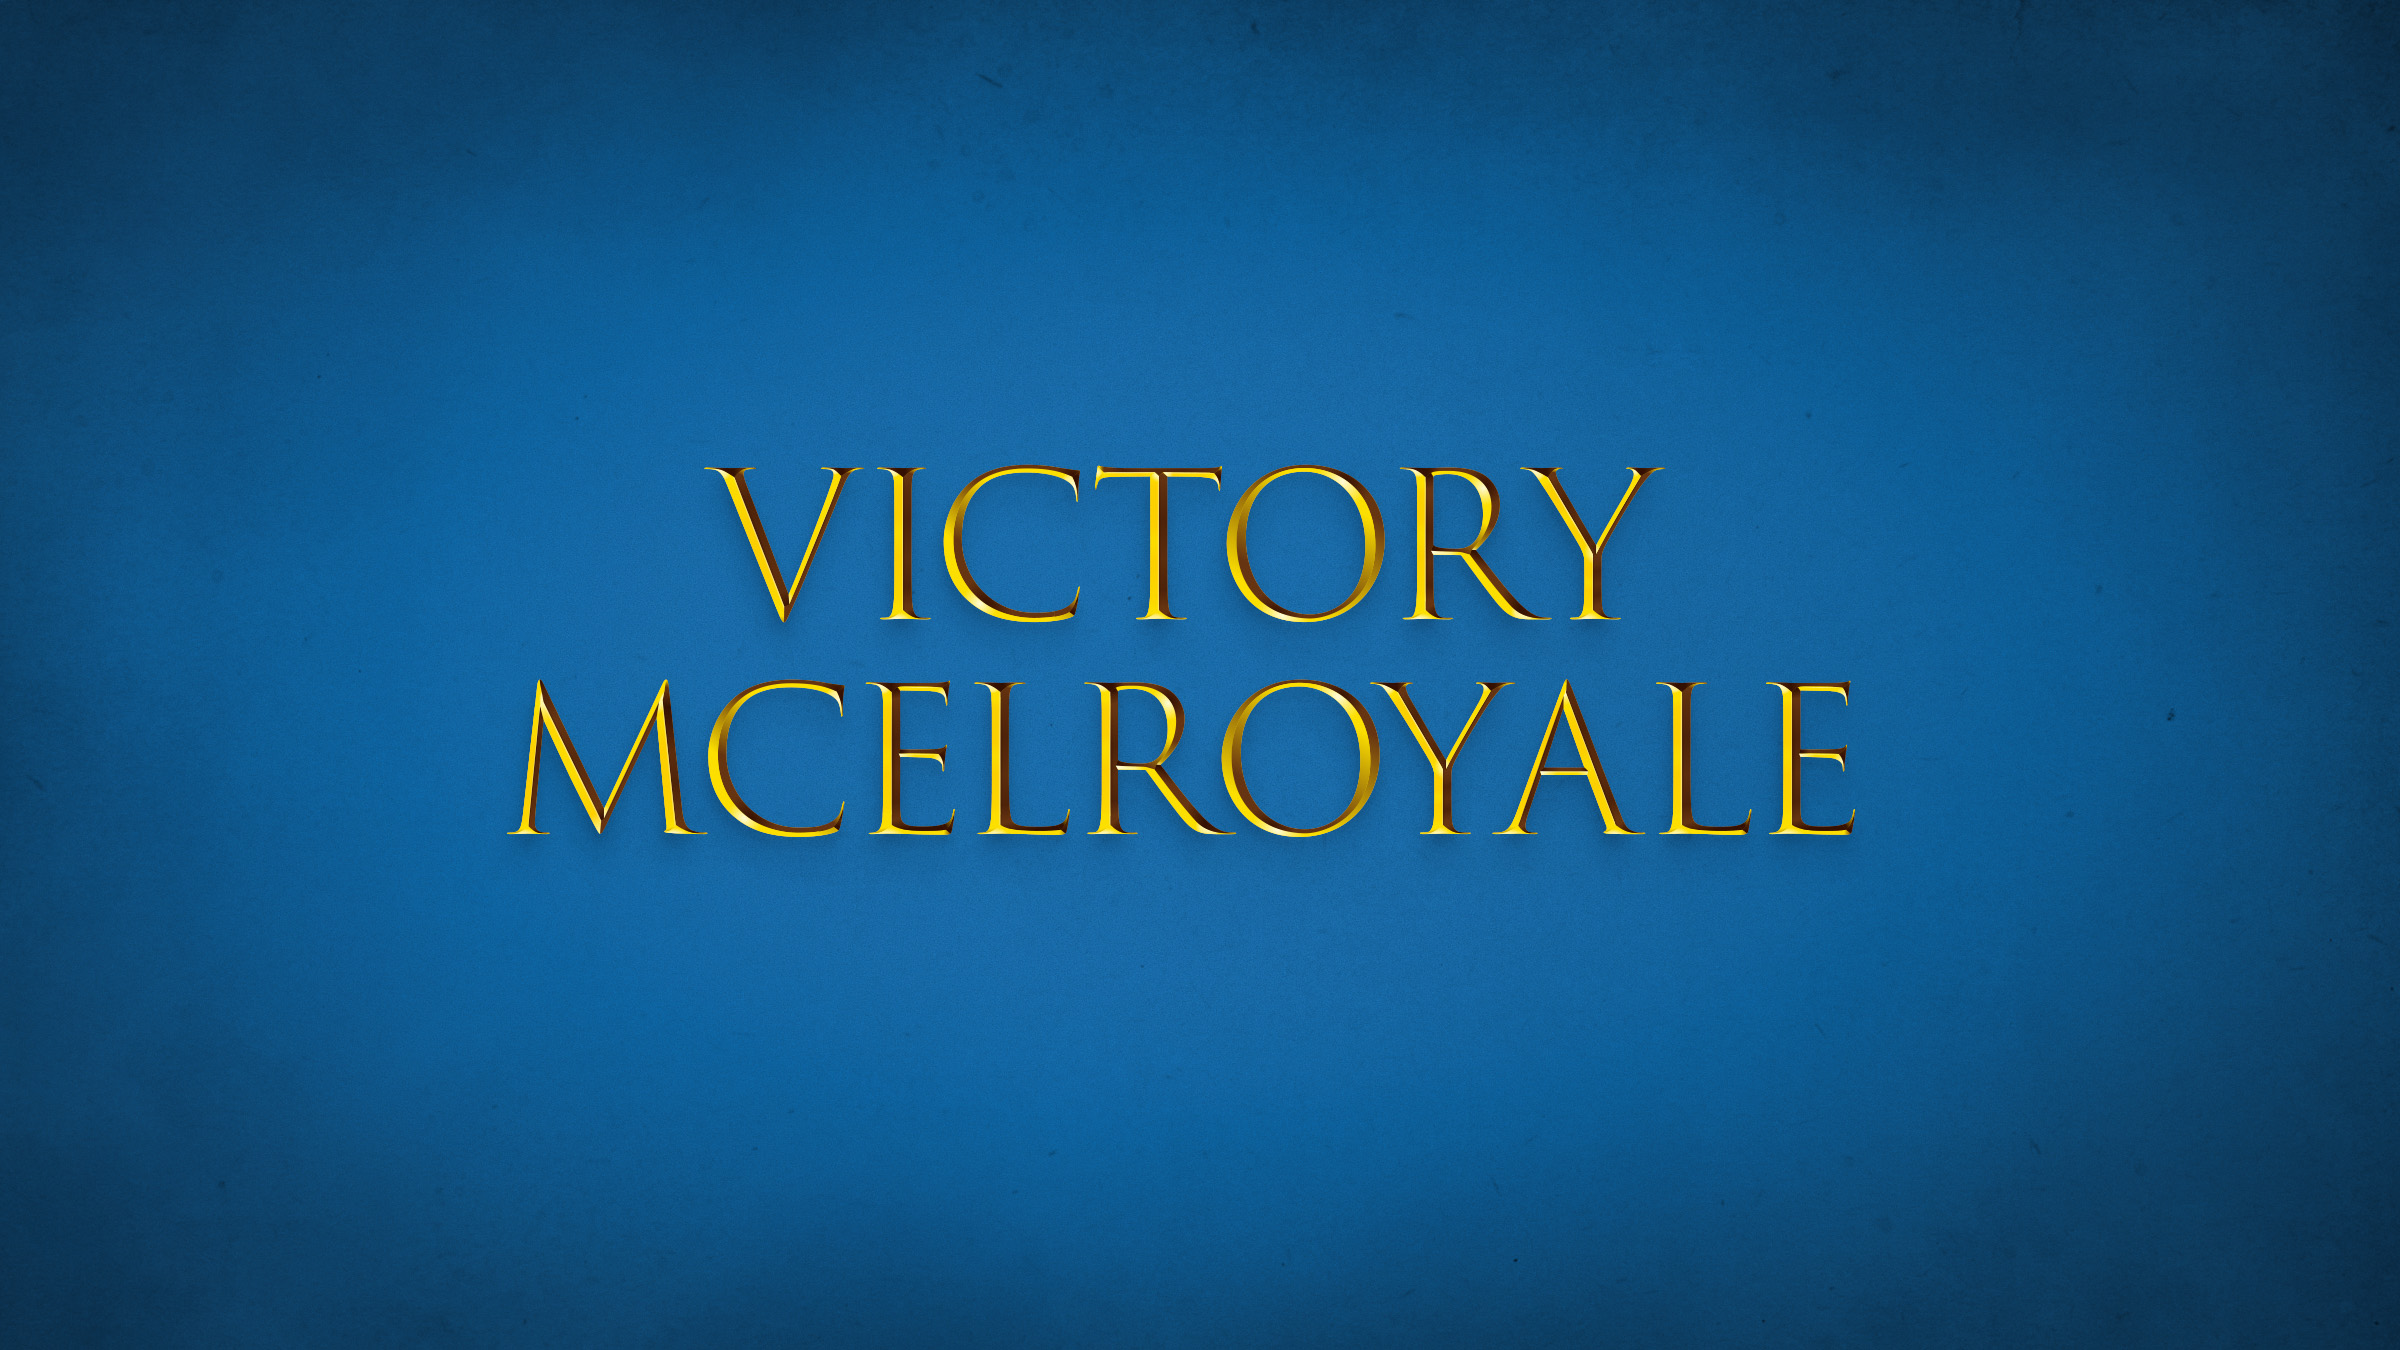 a blue background with the words “Victory McElroyale” written on it in gold all-caps text.